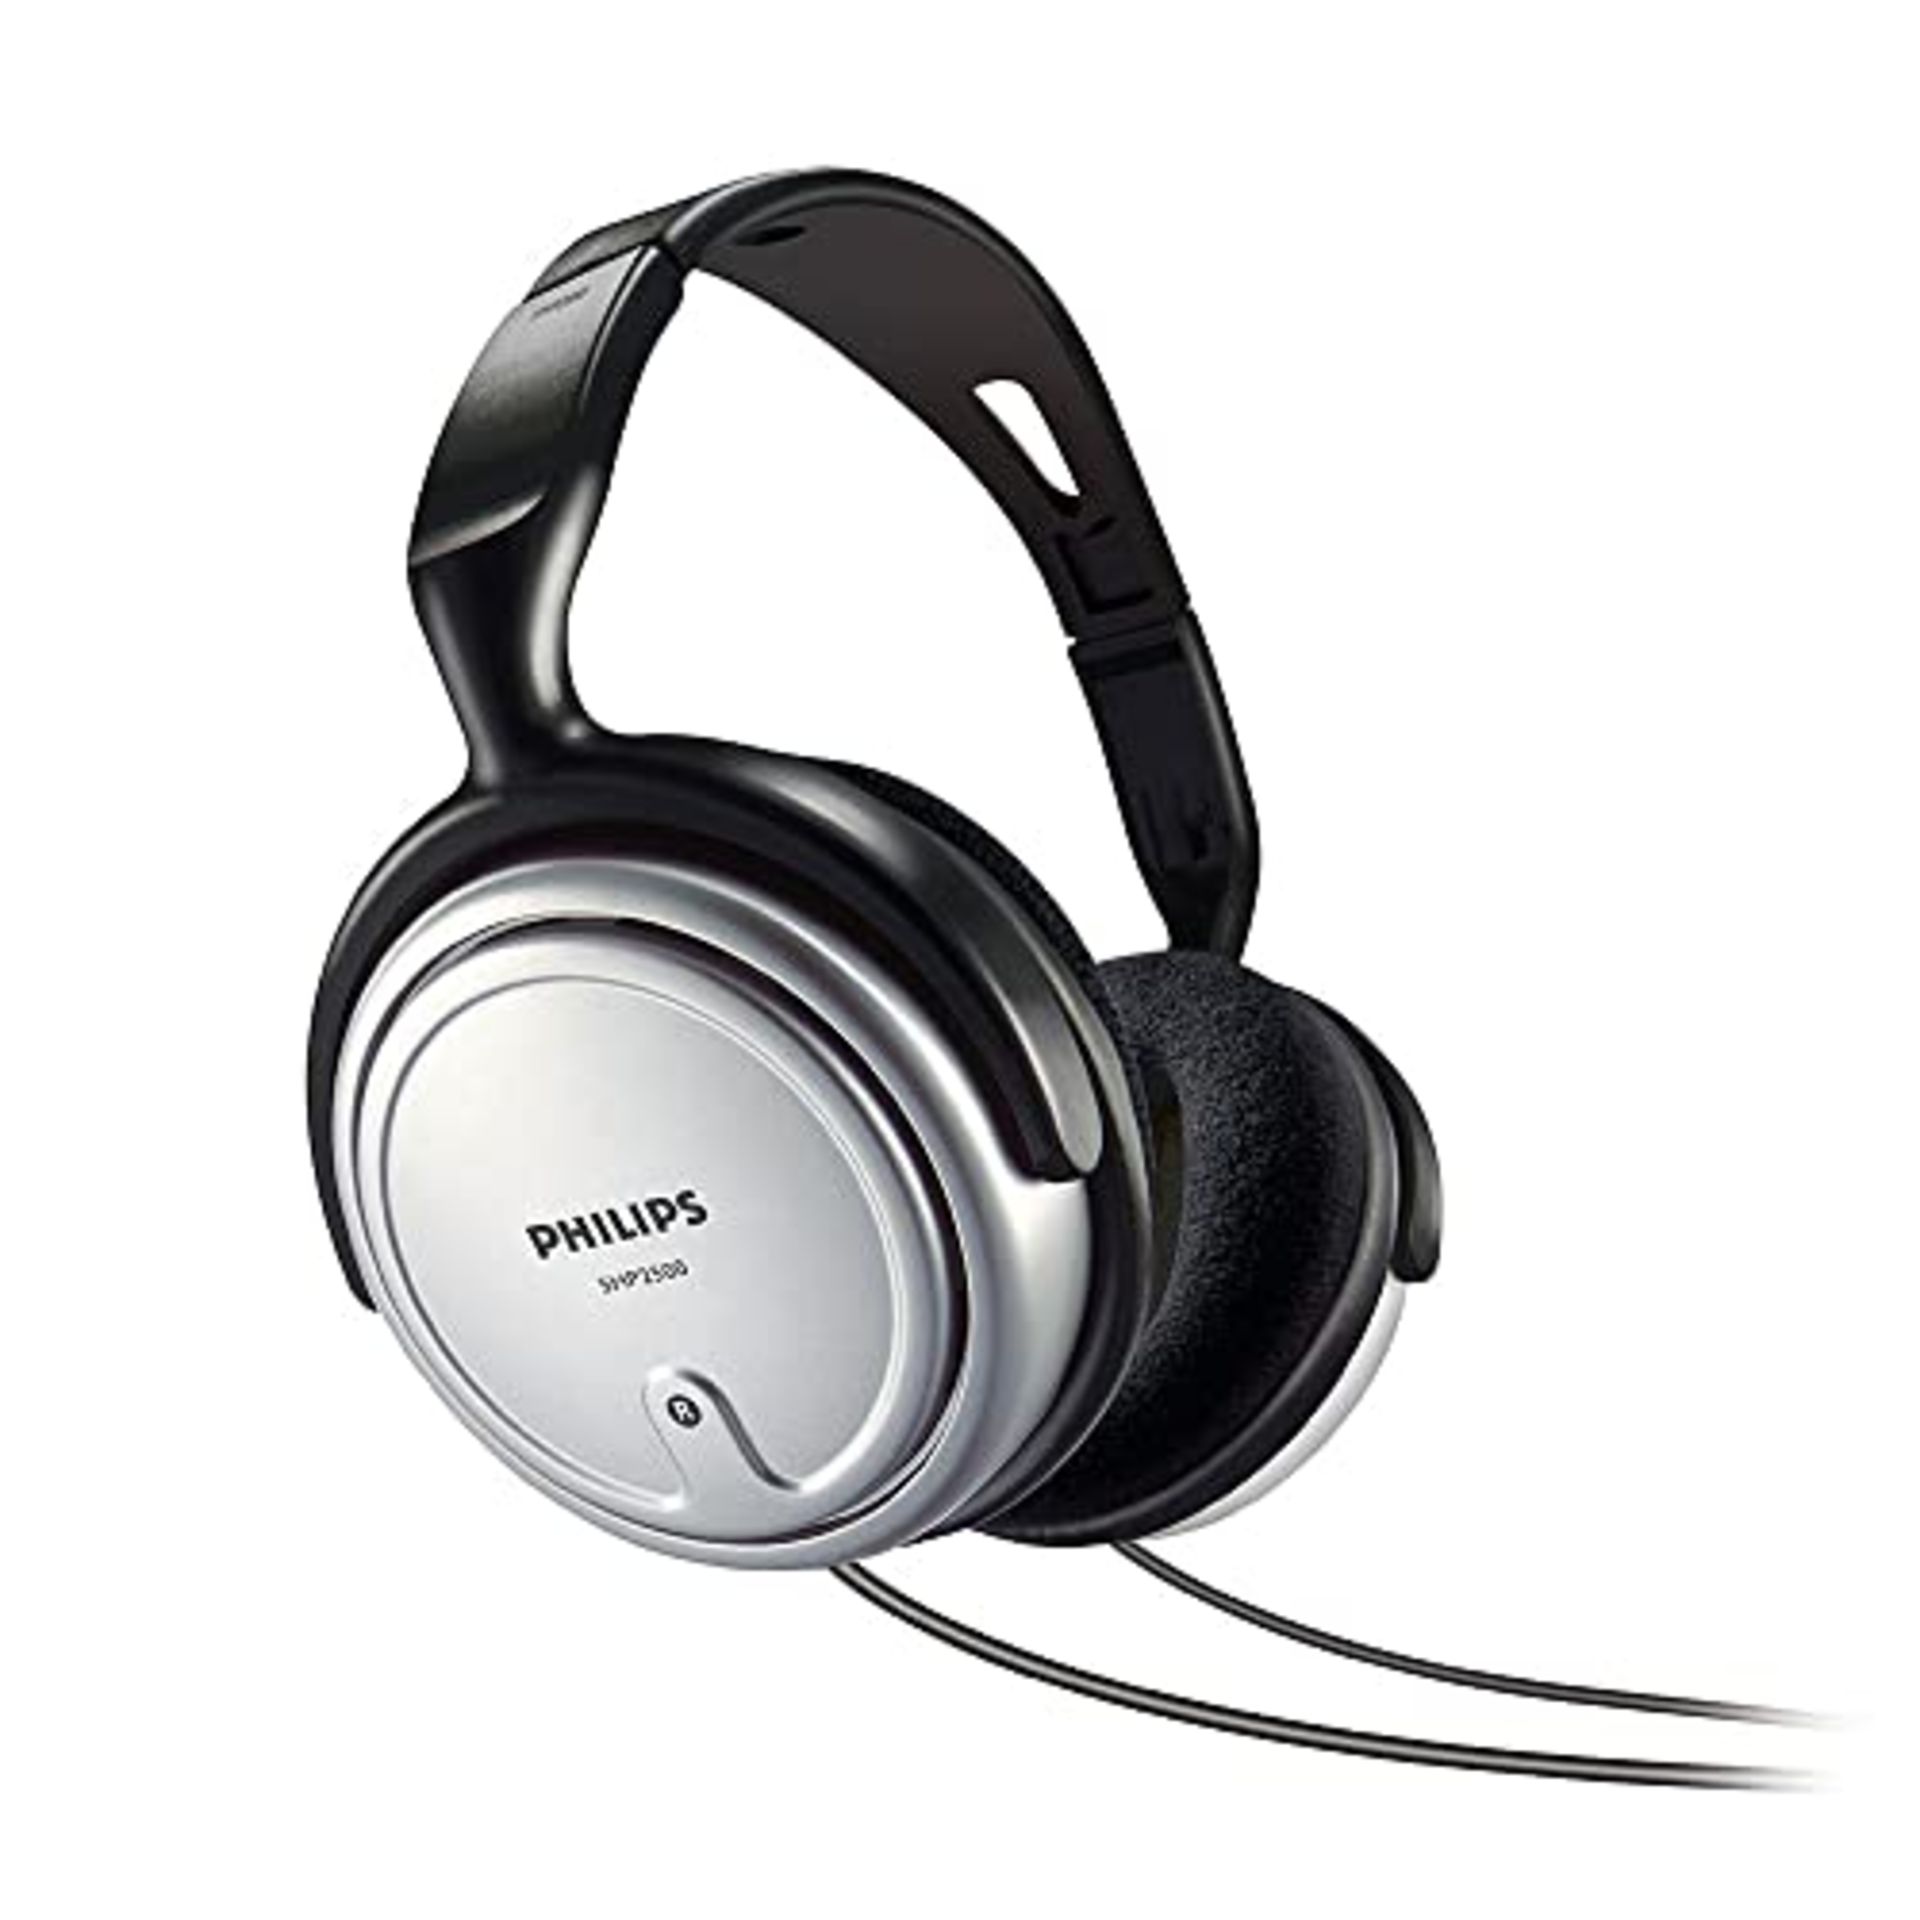 Philips SHP2500 Wired TV Headphones, 6 Meter Cable, Integrated Volume Control, Comfort